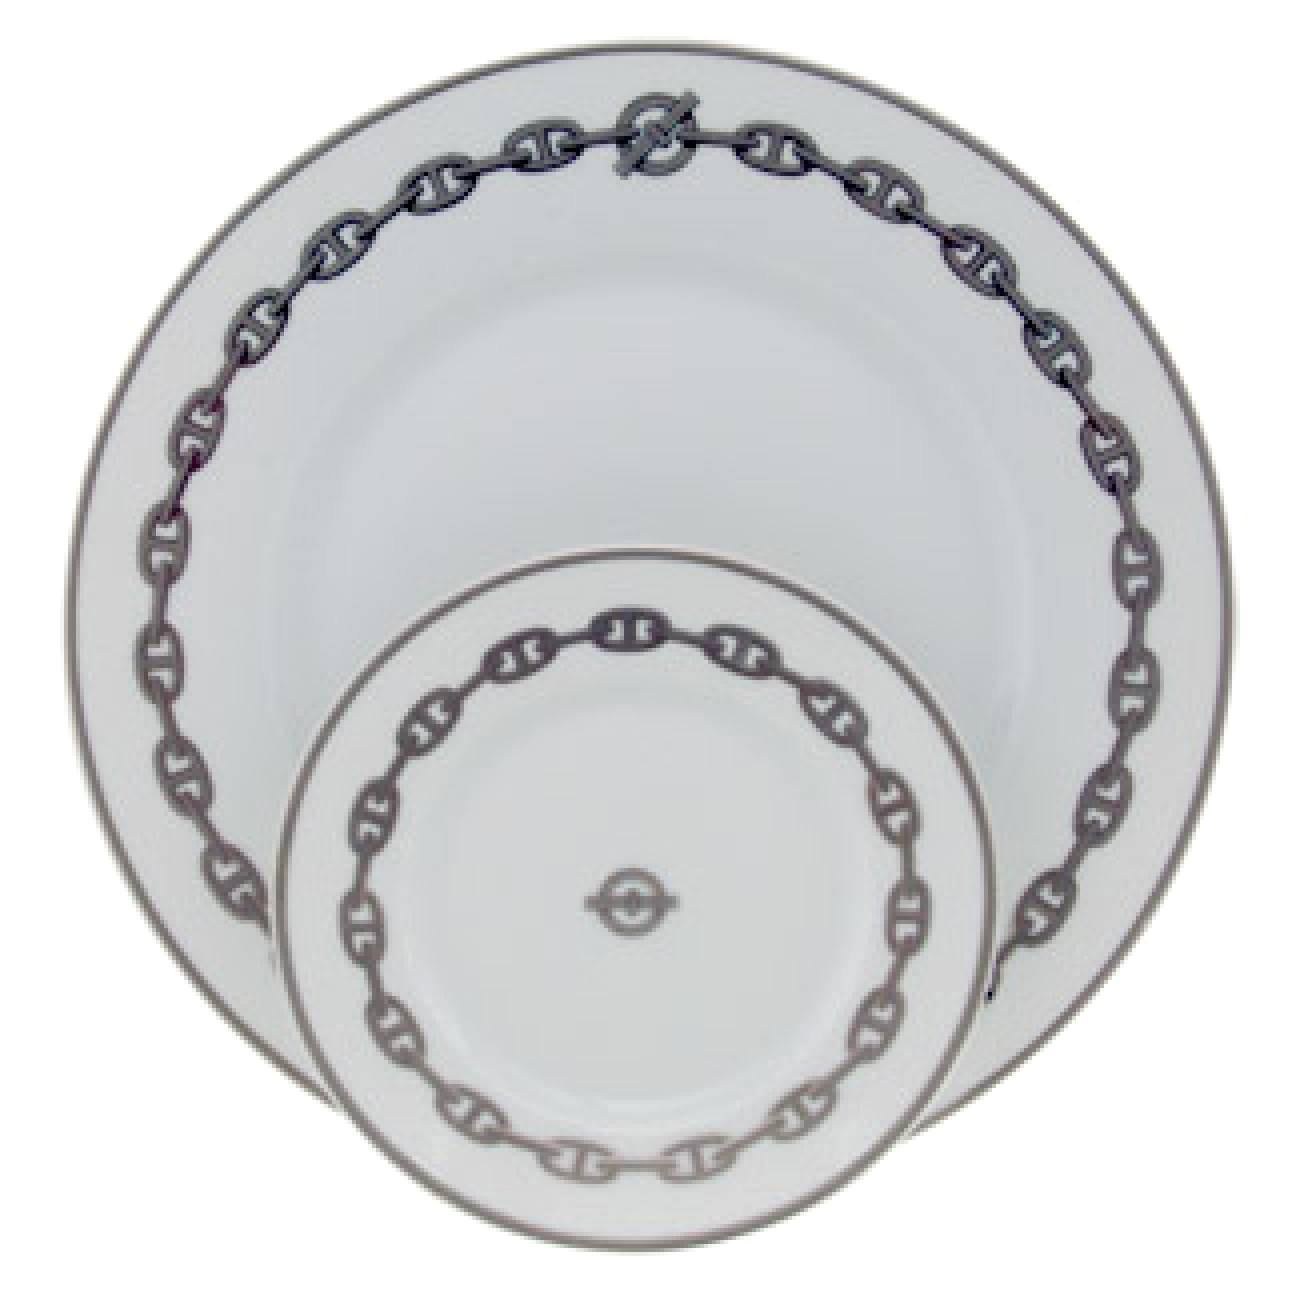 Set of 8 Hermes Place Settings in Chaine D'Ancre in Gray